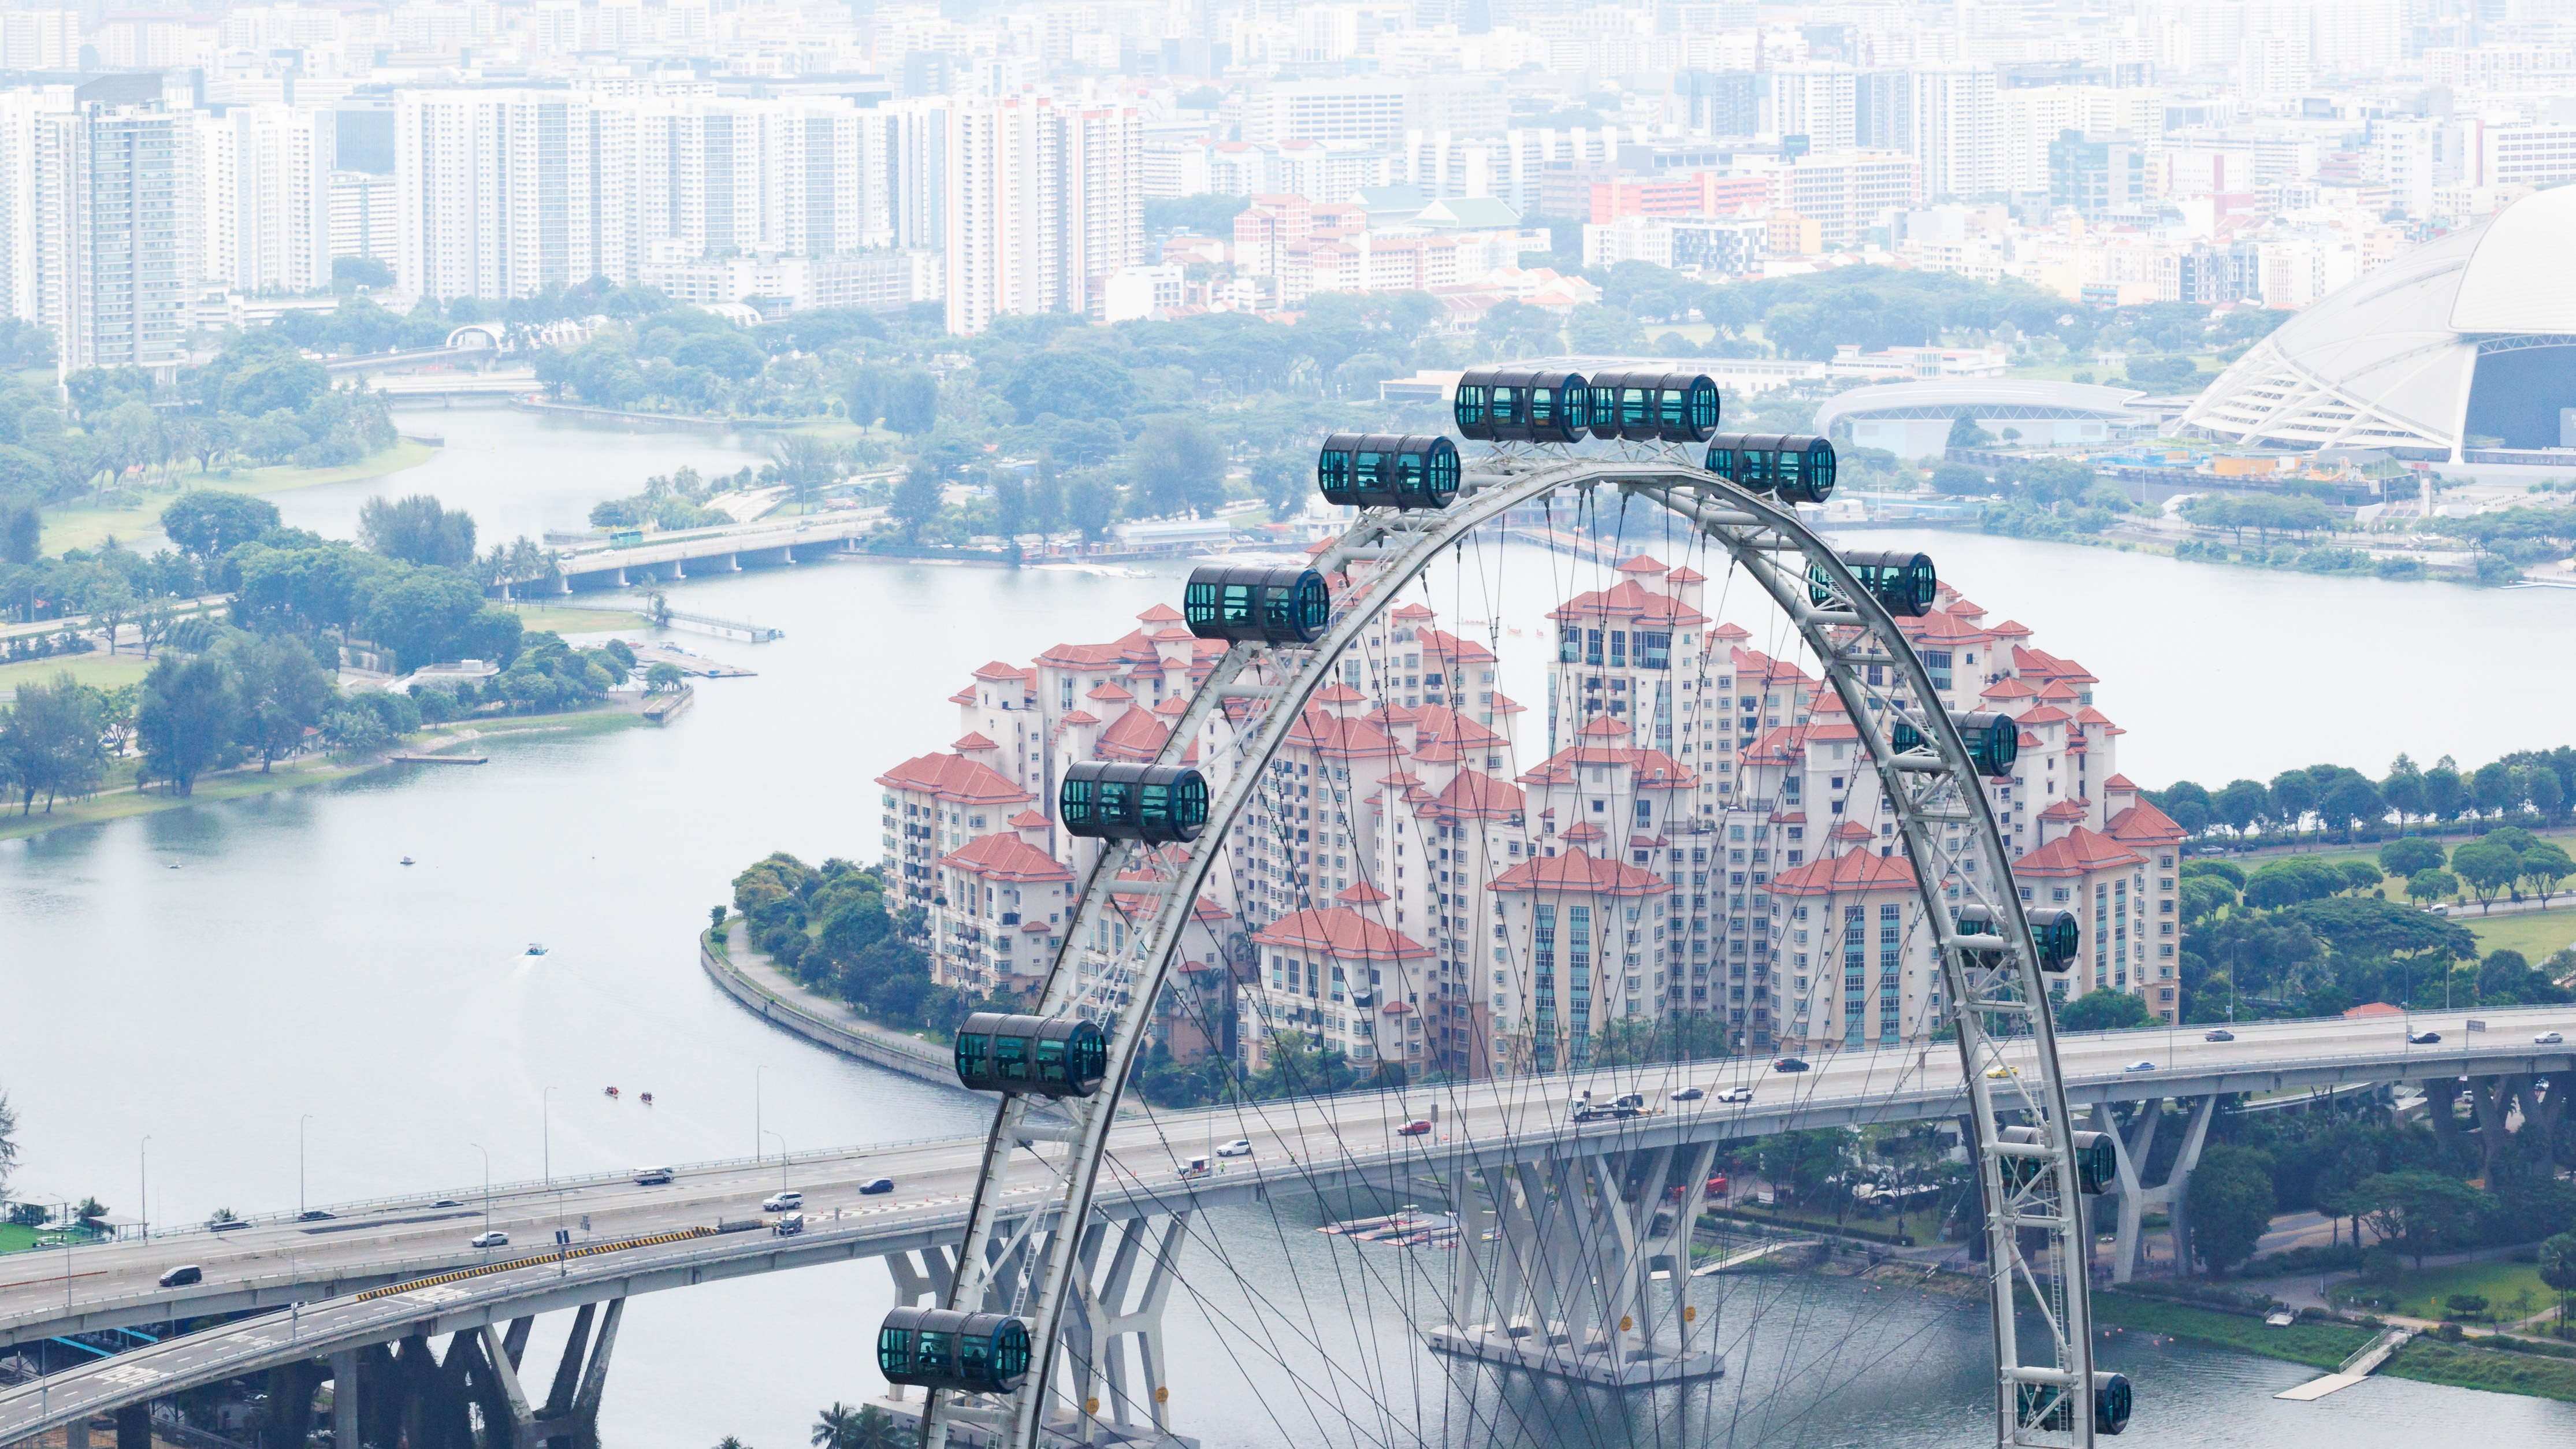 Cityscape of Singapore and ferris wheel seen from Marina Bay Sands Observation Deck.